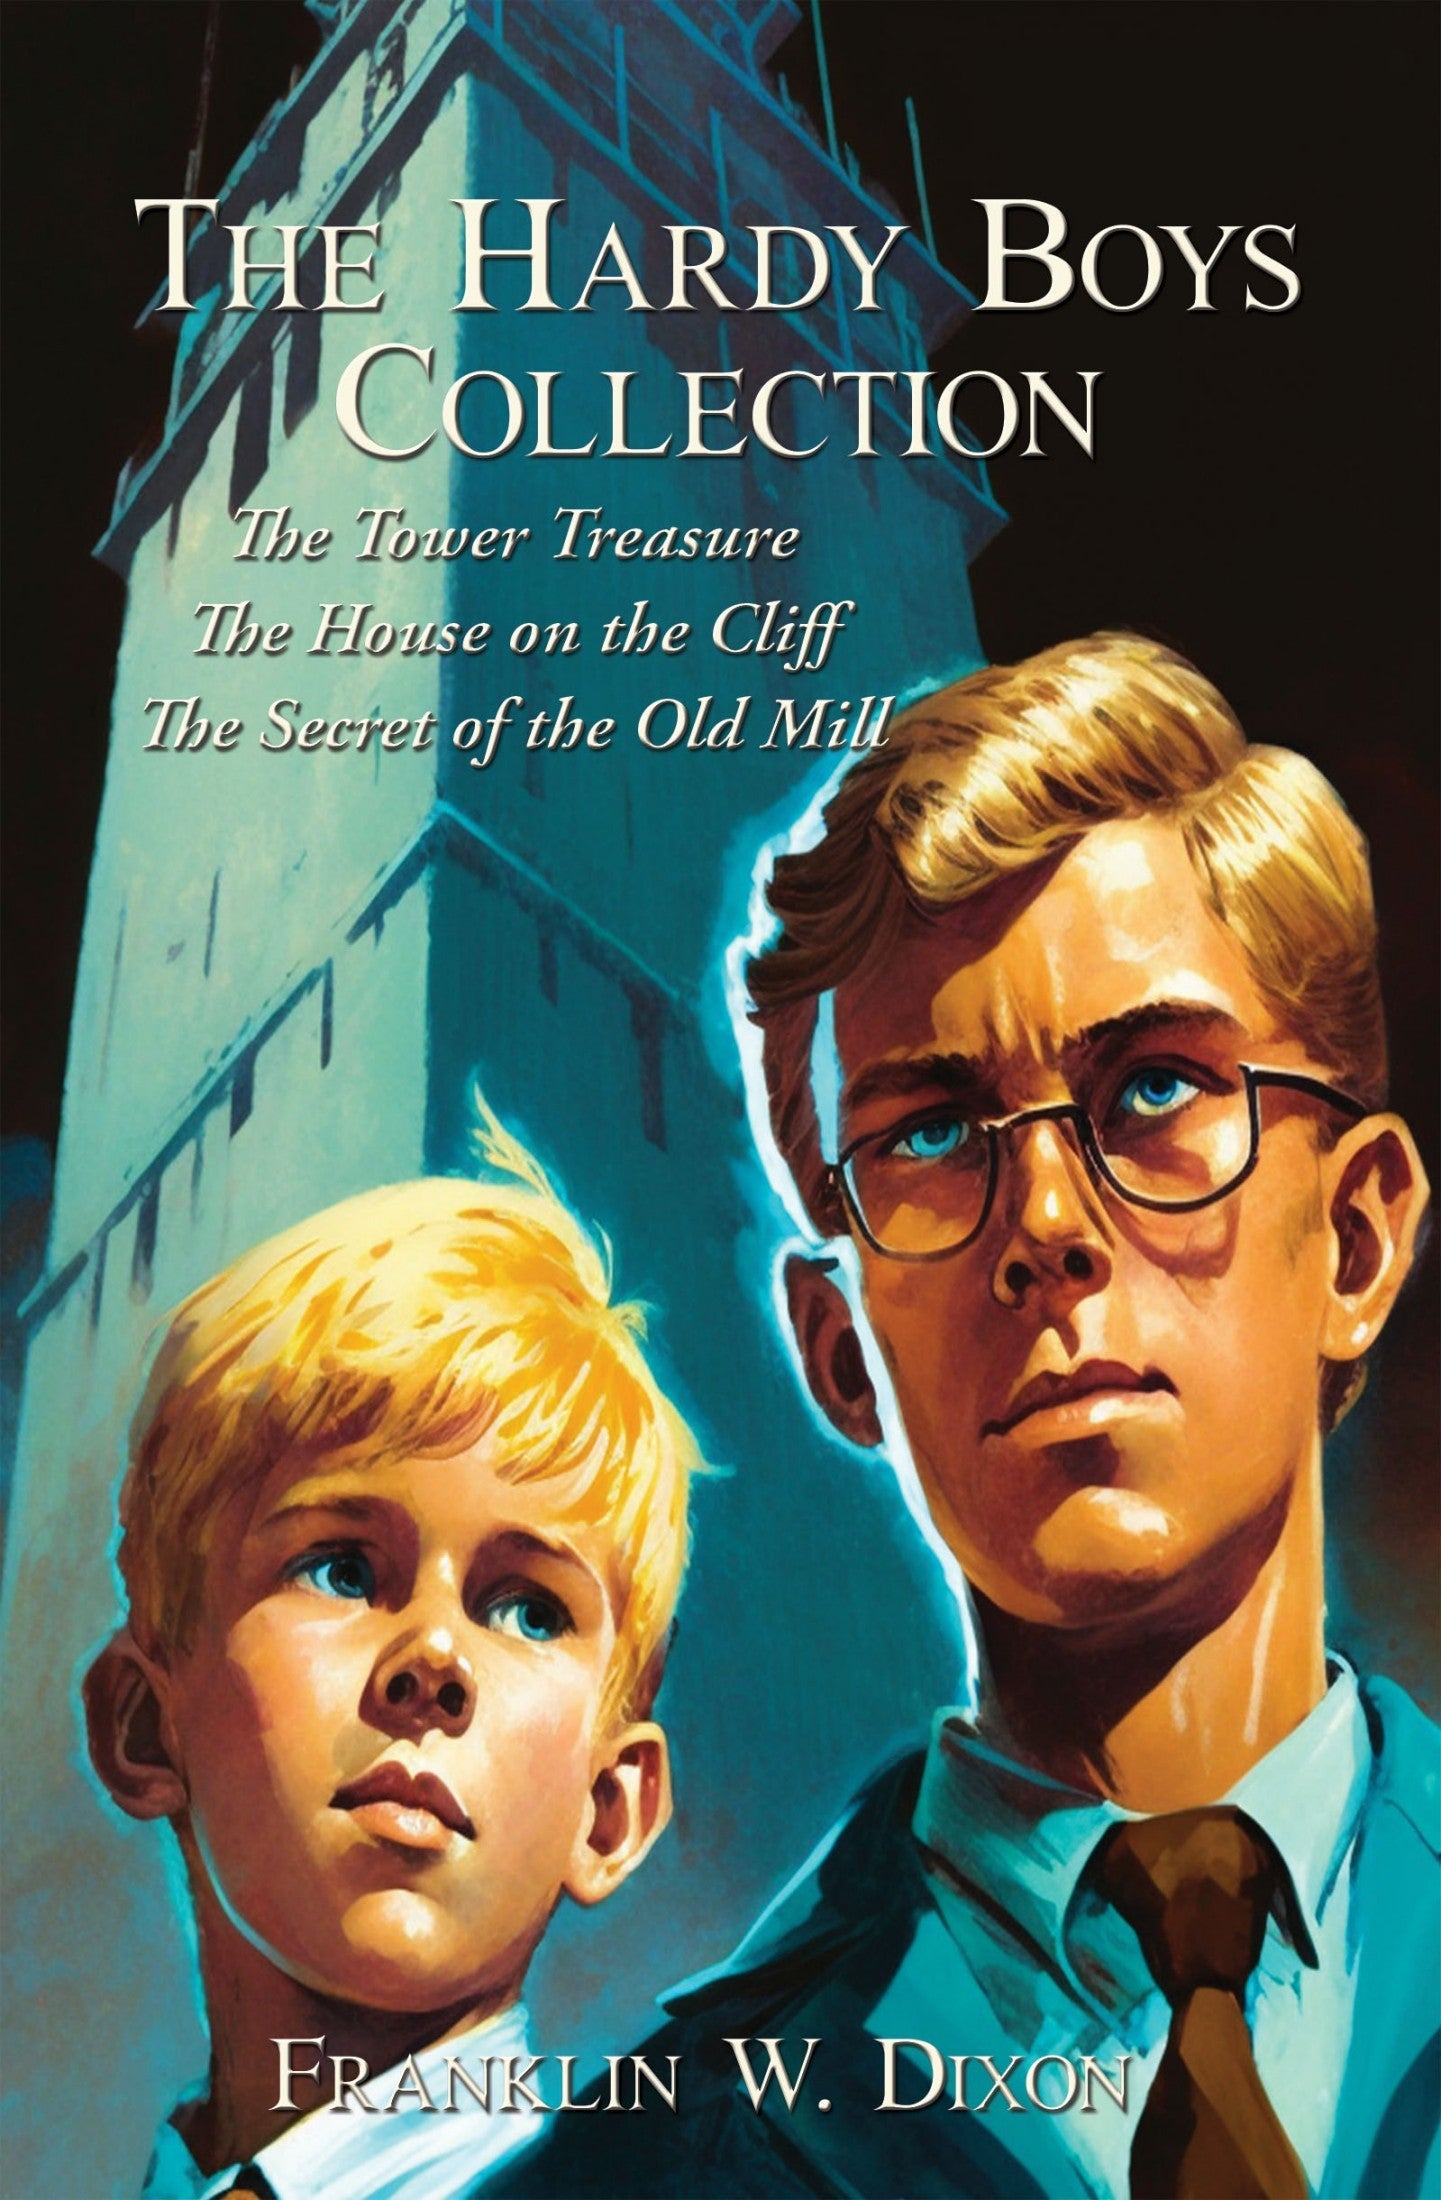 Cover art for The Hardy Boys Collection.